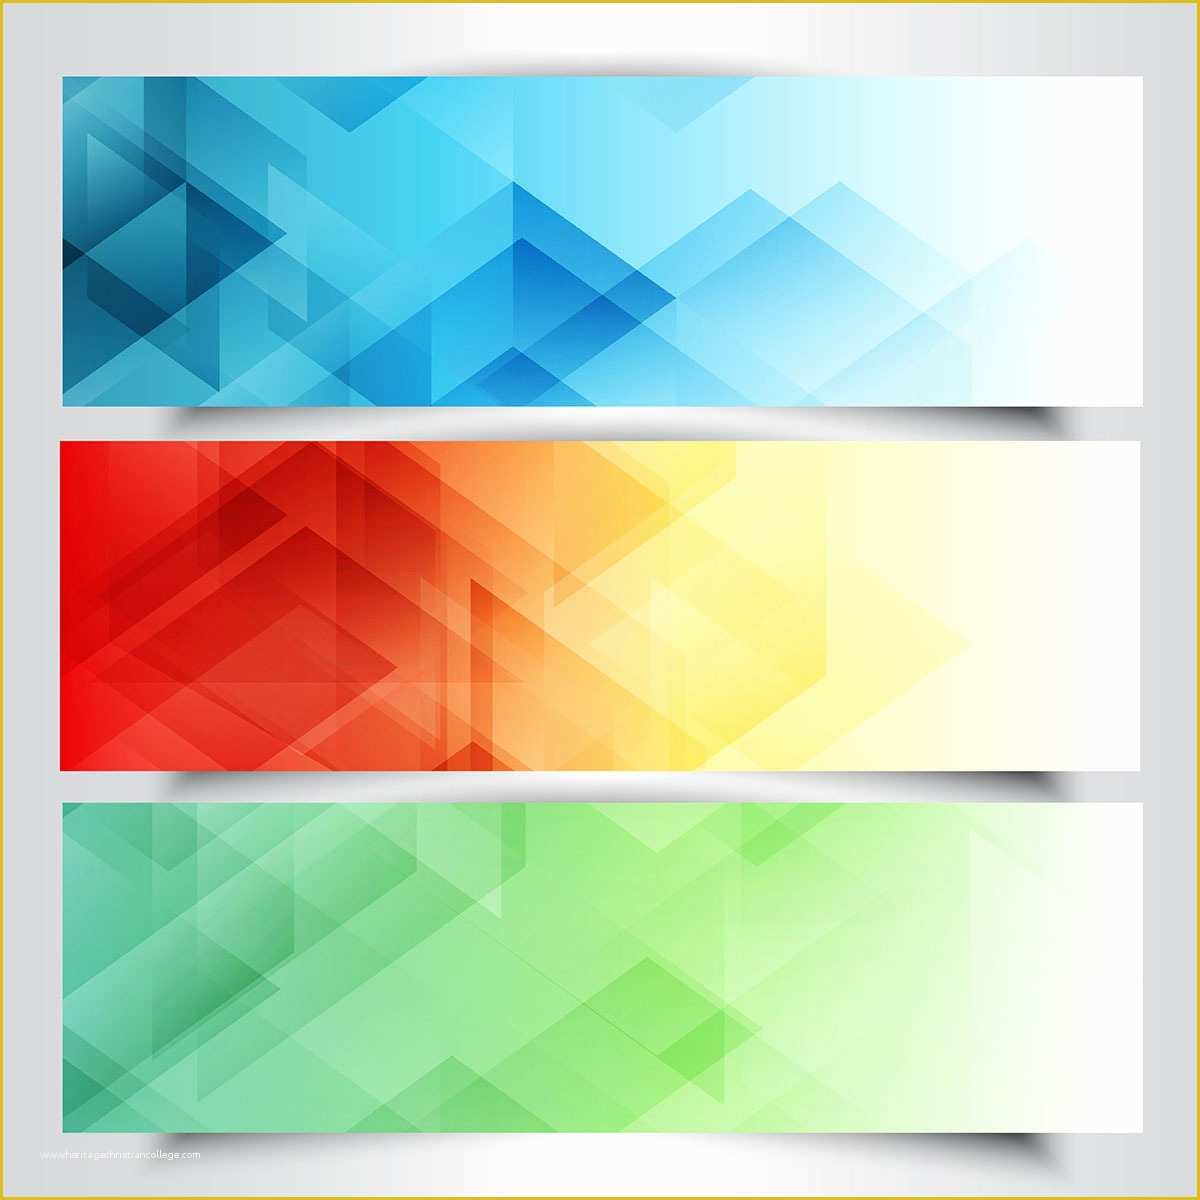 Free Sign Design Templates Of Modern Banners with Abstract Design Download Free Vector